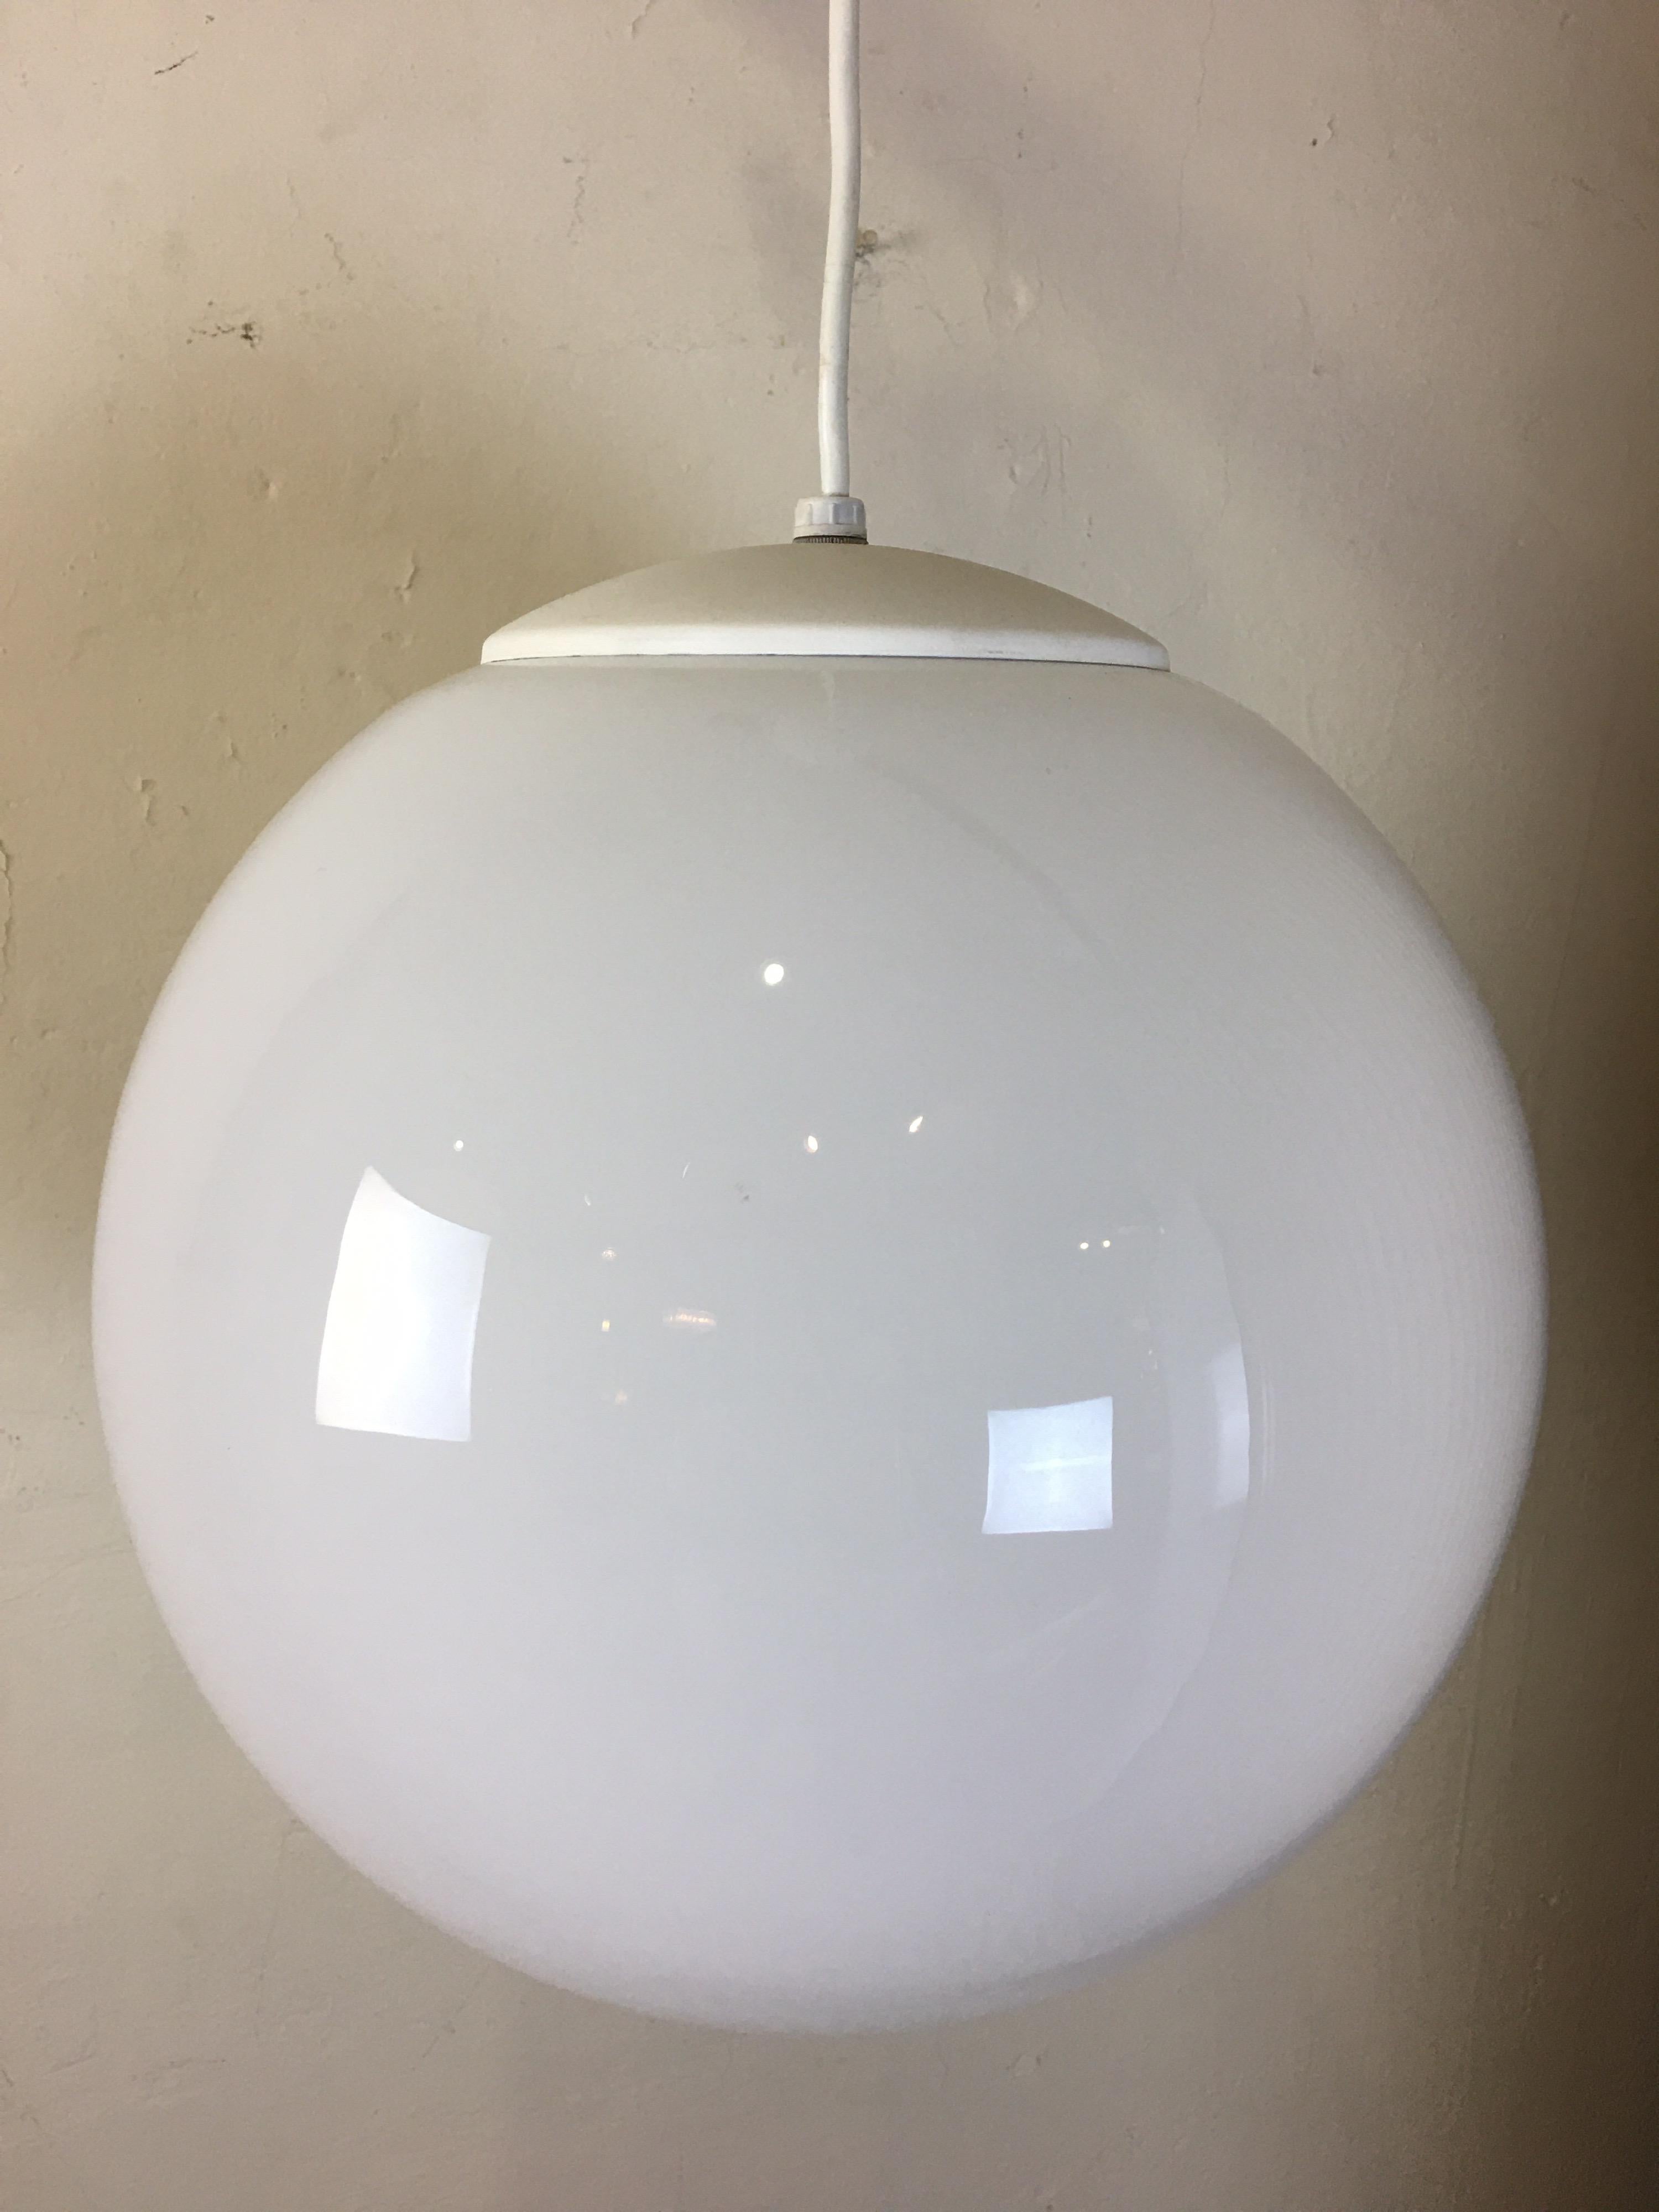 Simple elegant milk glass ball ceiling fixture. Dates to the late 1950s or early 1960s. Produced in Cleveland Ohio. Globe is a little bigger than 13